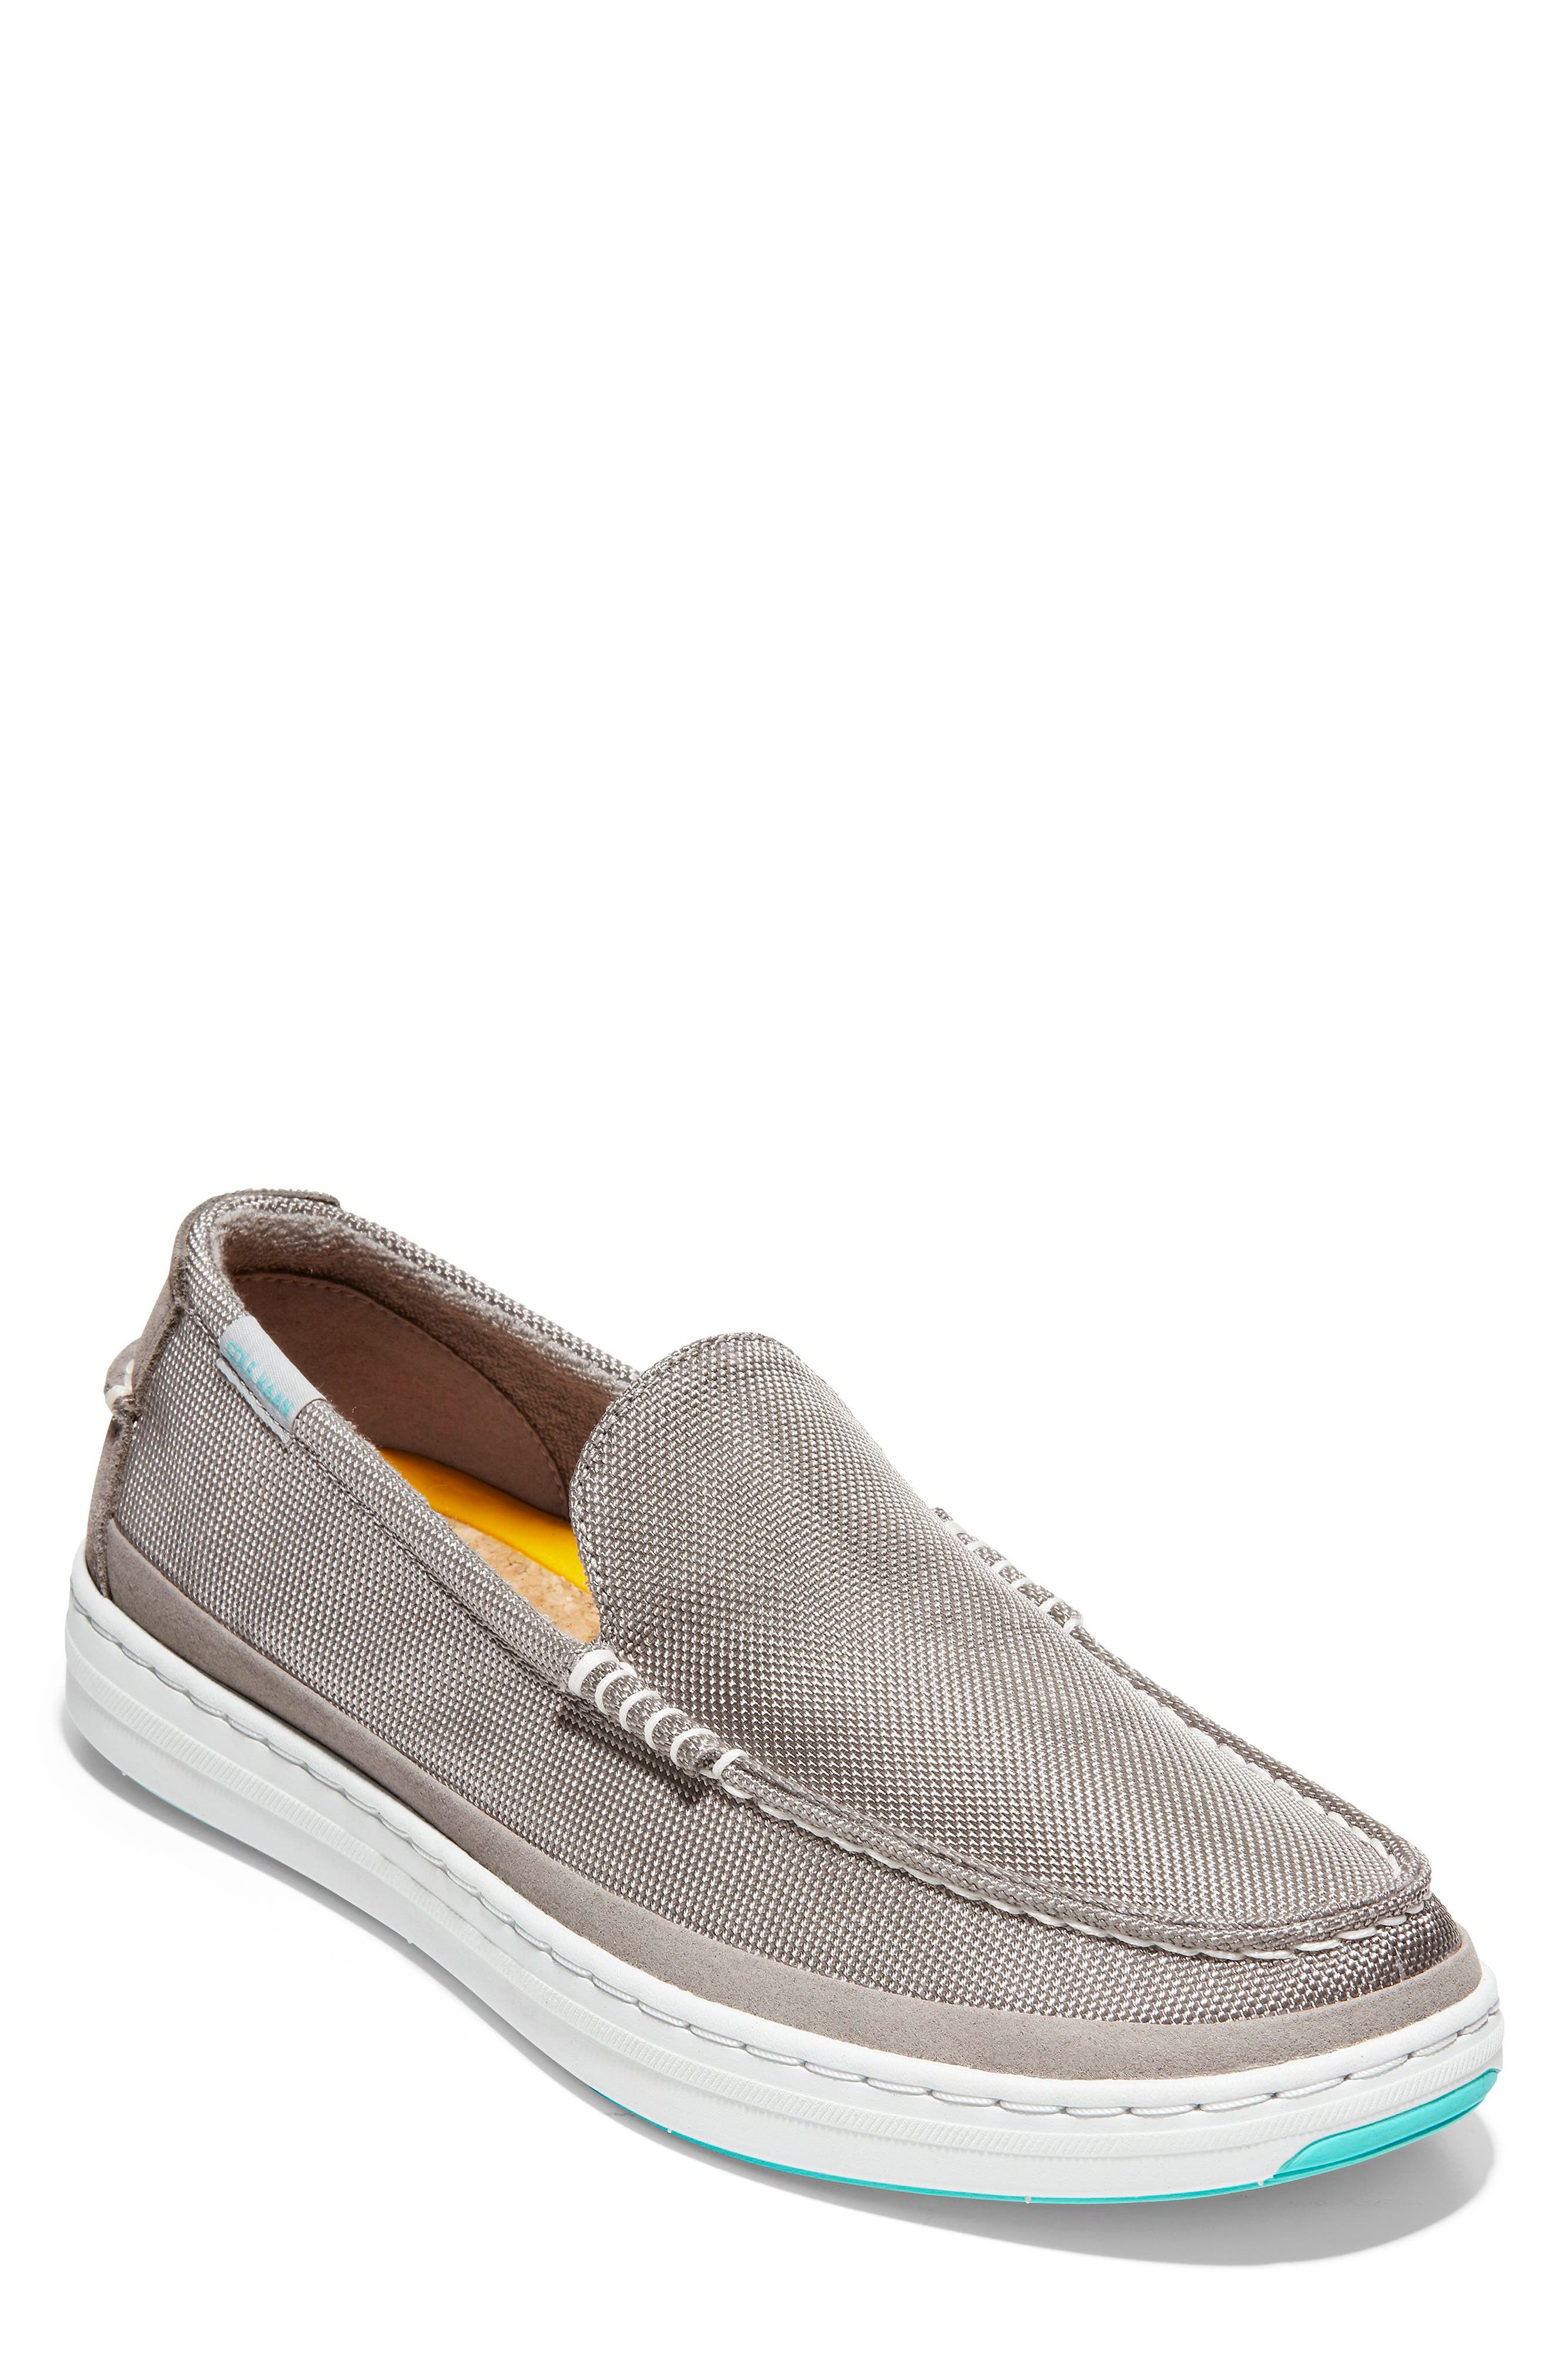 nordstrom mens cole haan shoes